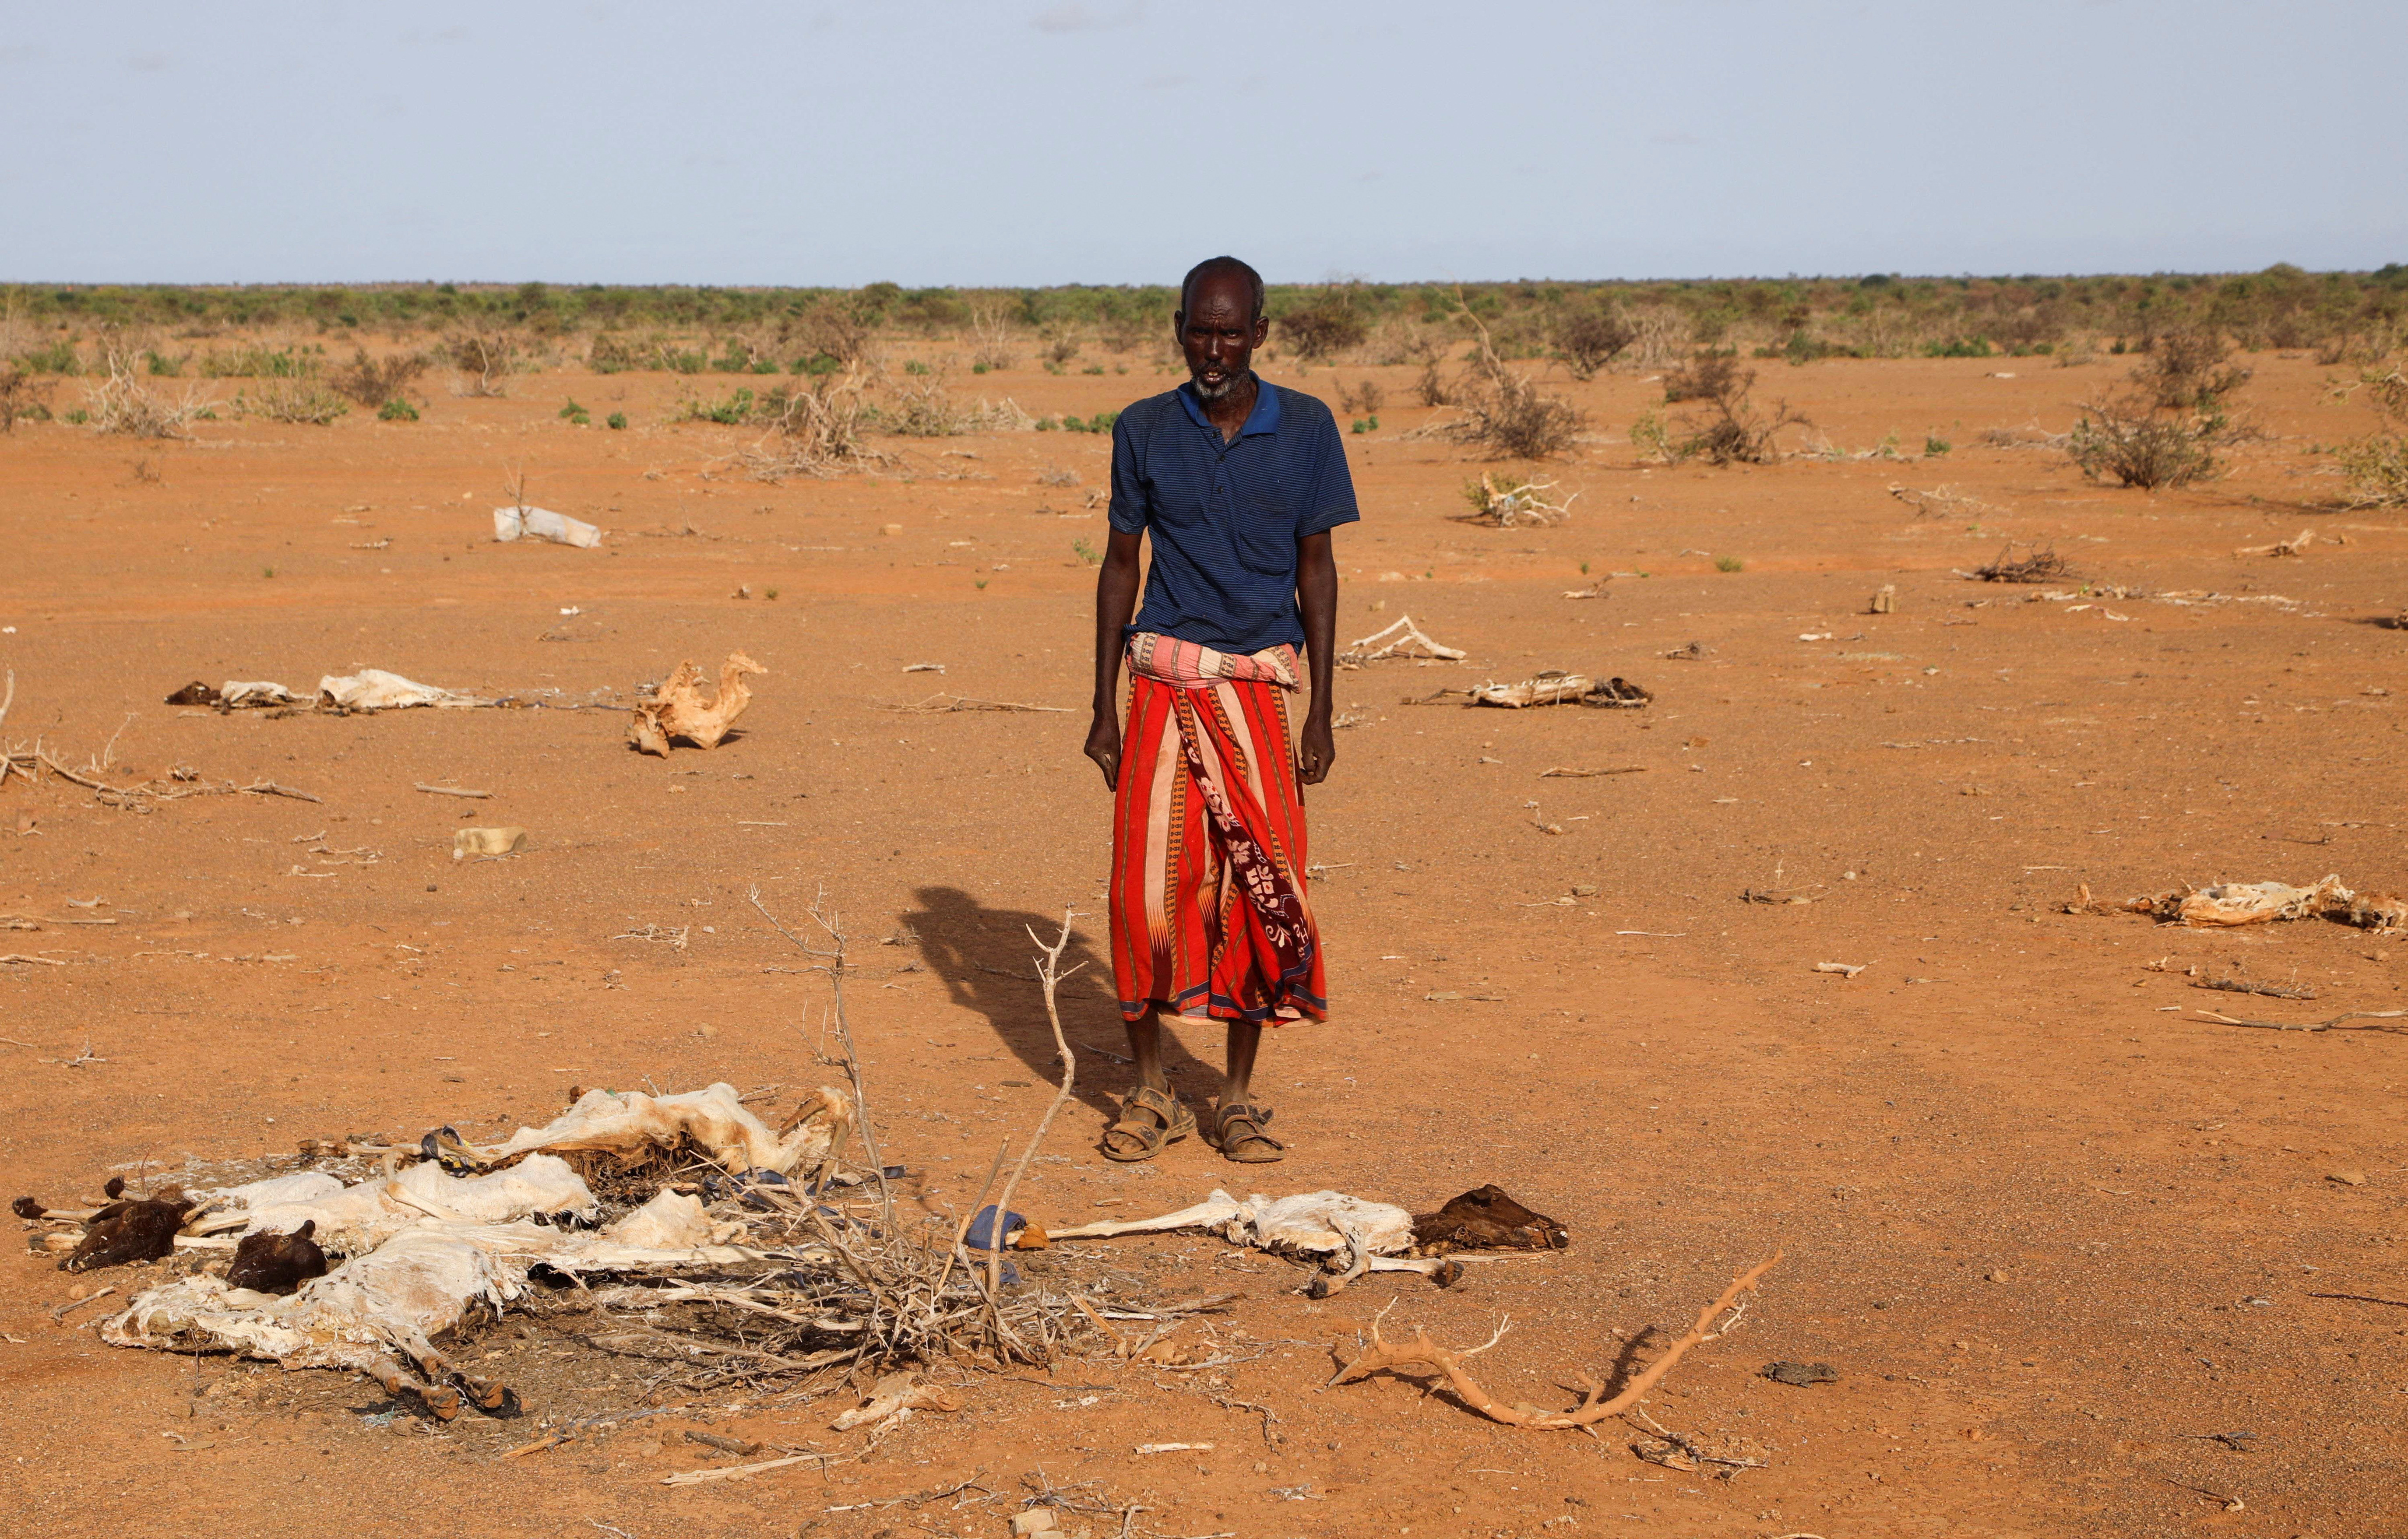 Dhicis Guray, an internally displaced Somali man, looks at the carcass of his dead livestock following severe droughts near Dollow, Gedo Region